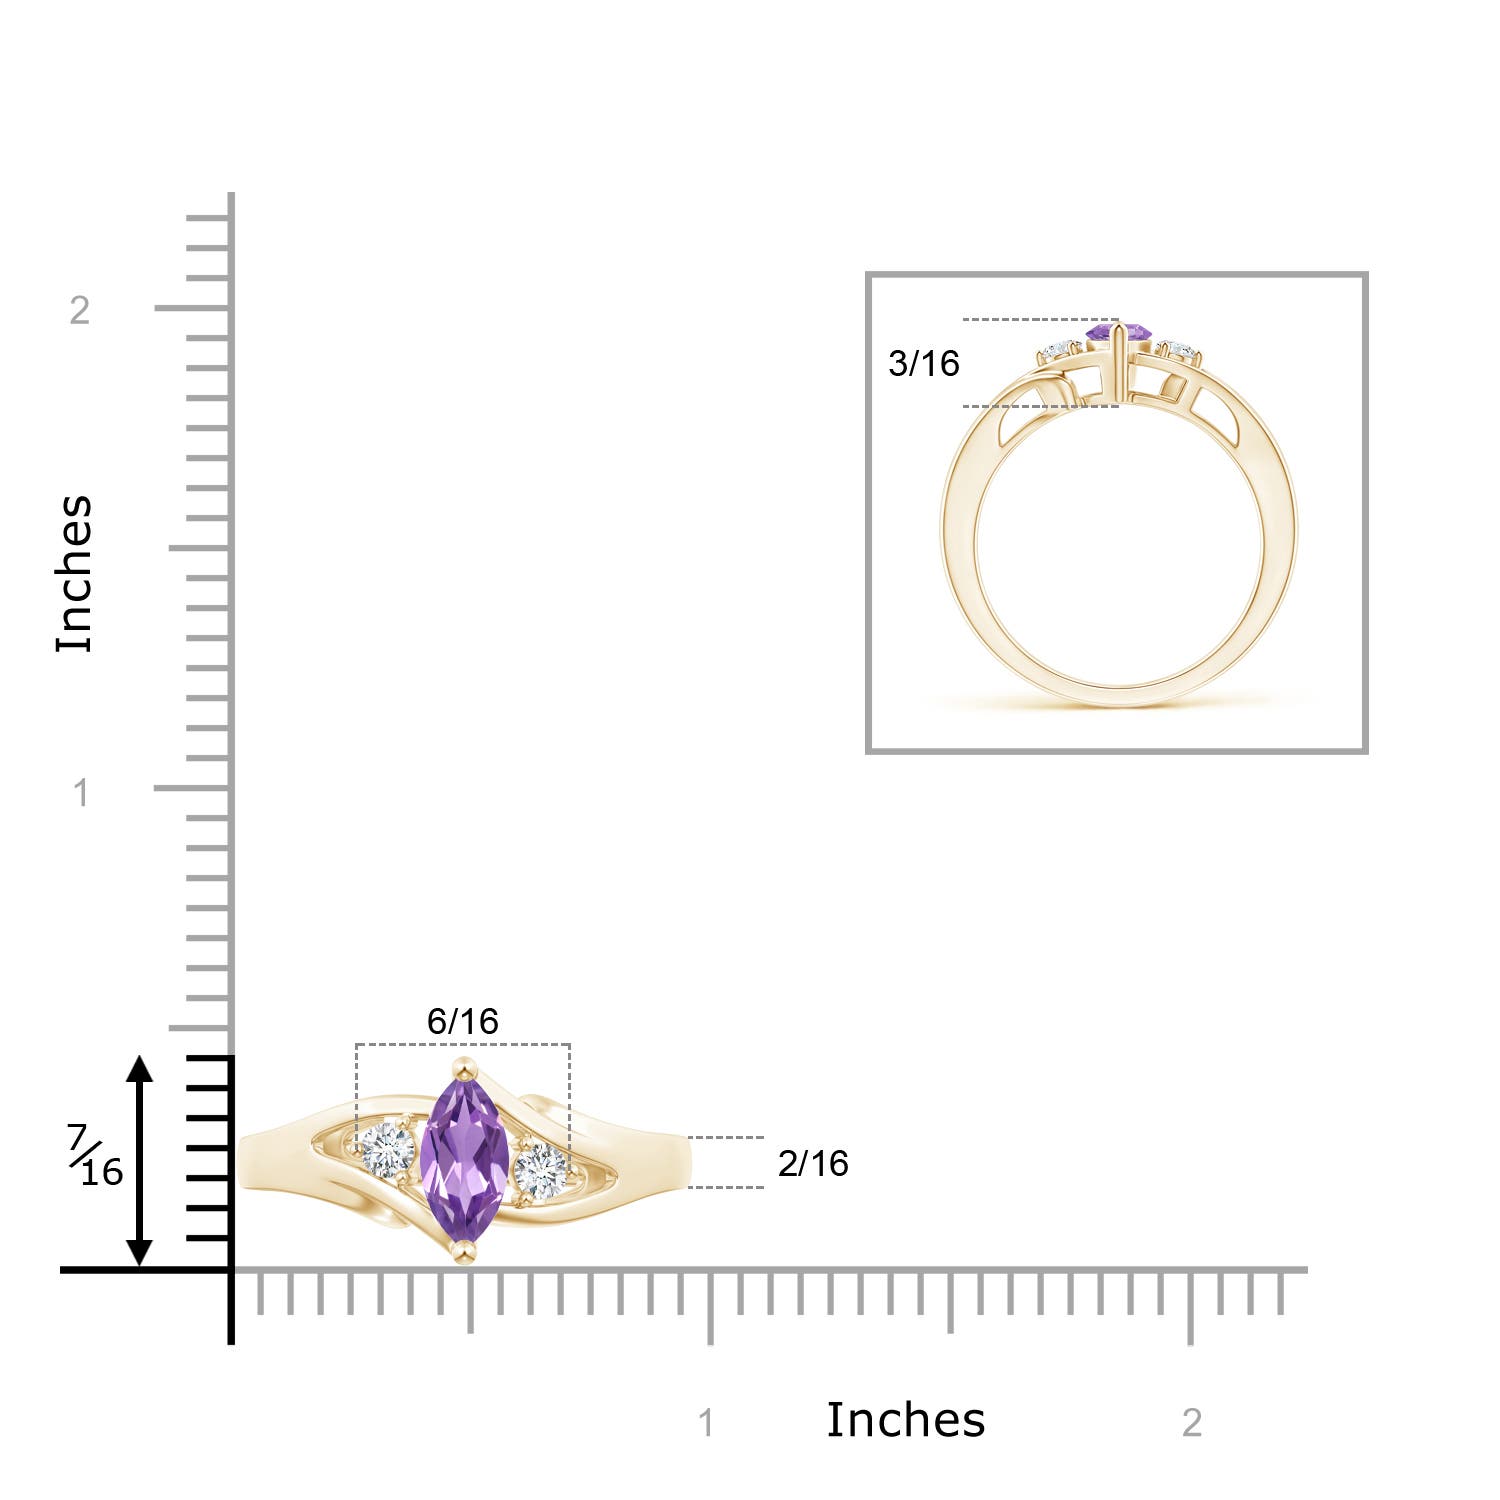 A - Amethyst / 0.64 CT / 14 KT Yellow Gold